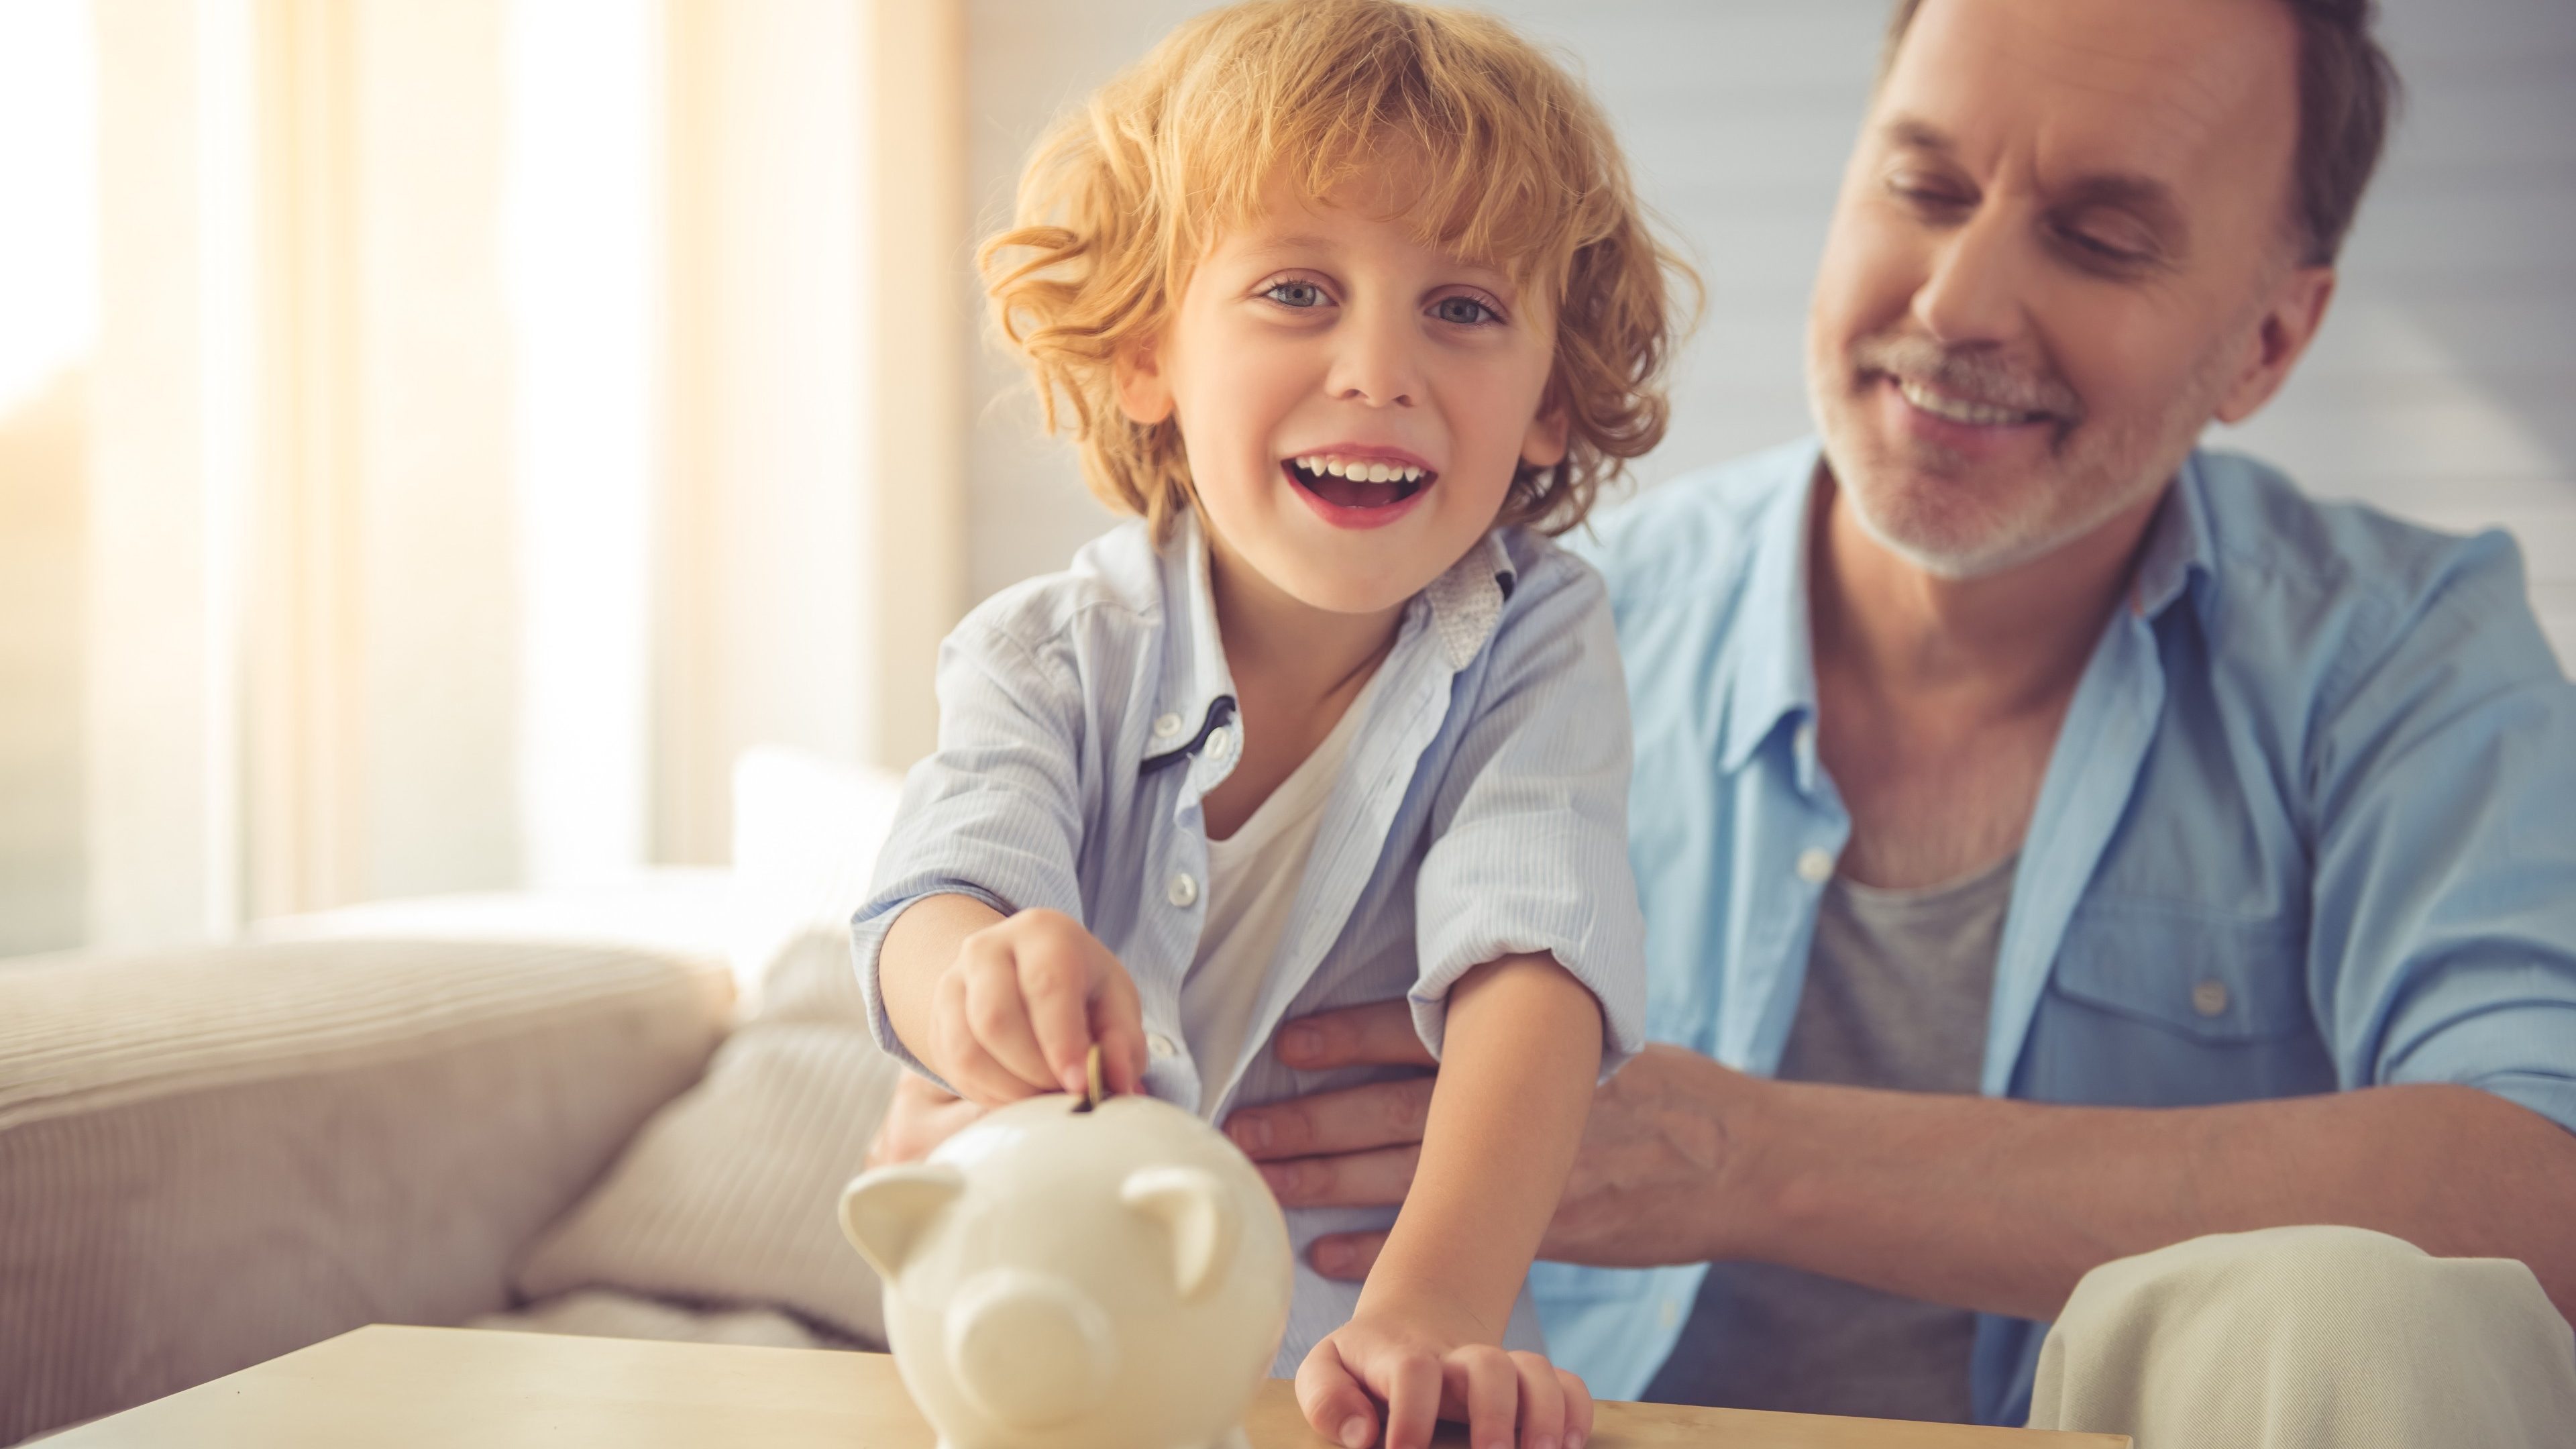 Cute little boy is putting coin into the piggy bank, looking at camera and smiling while spending time with his grandpa at home